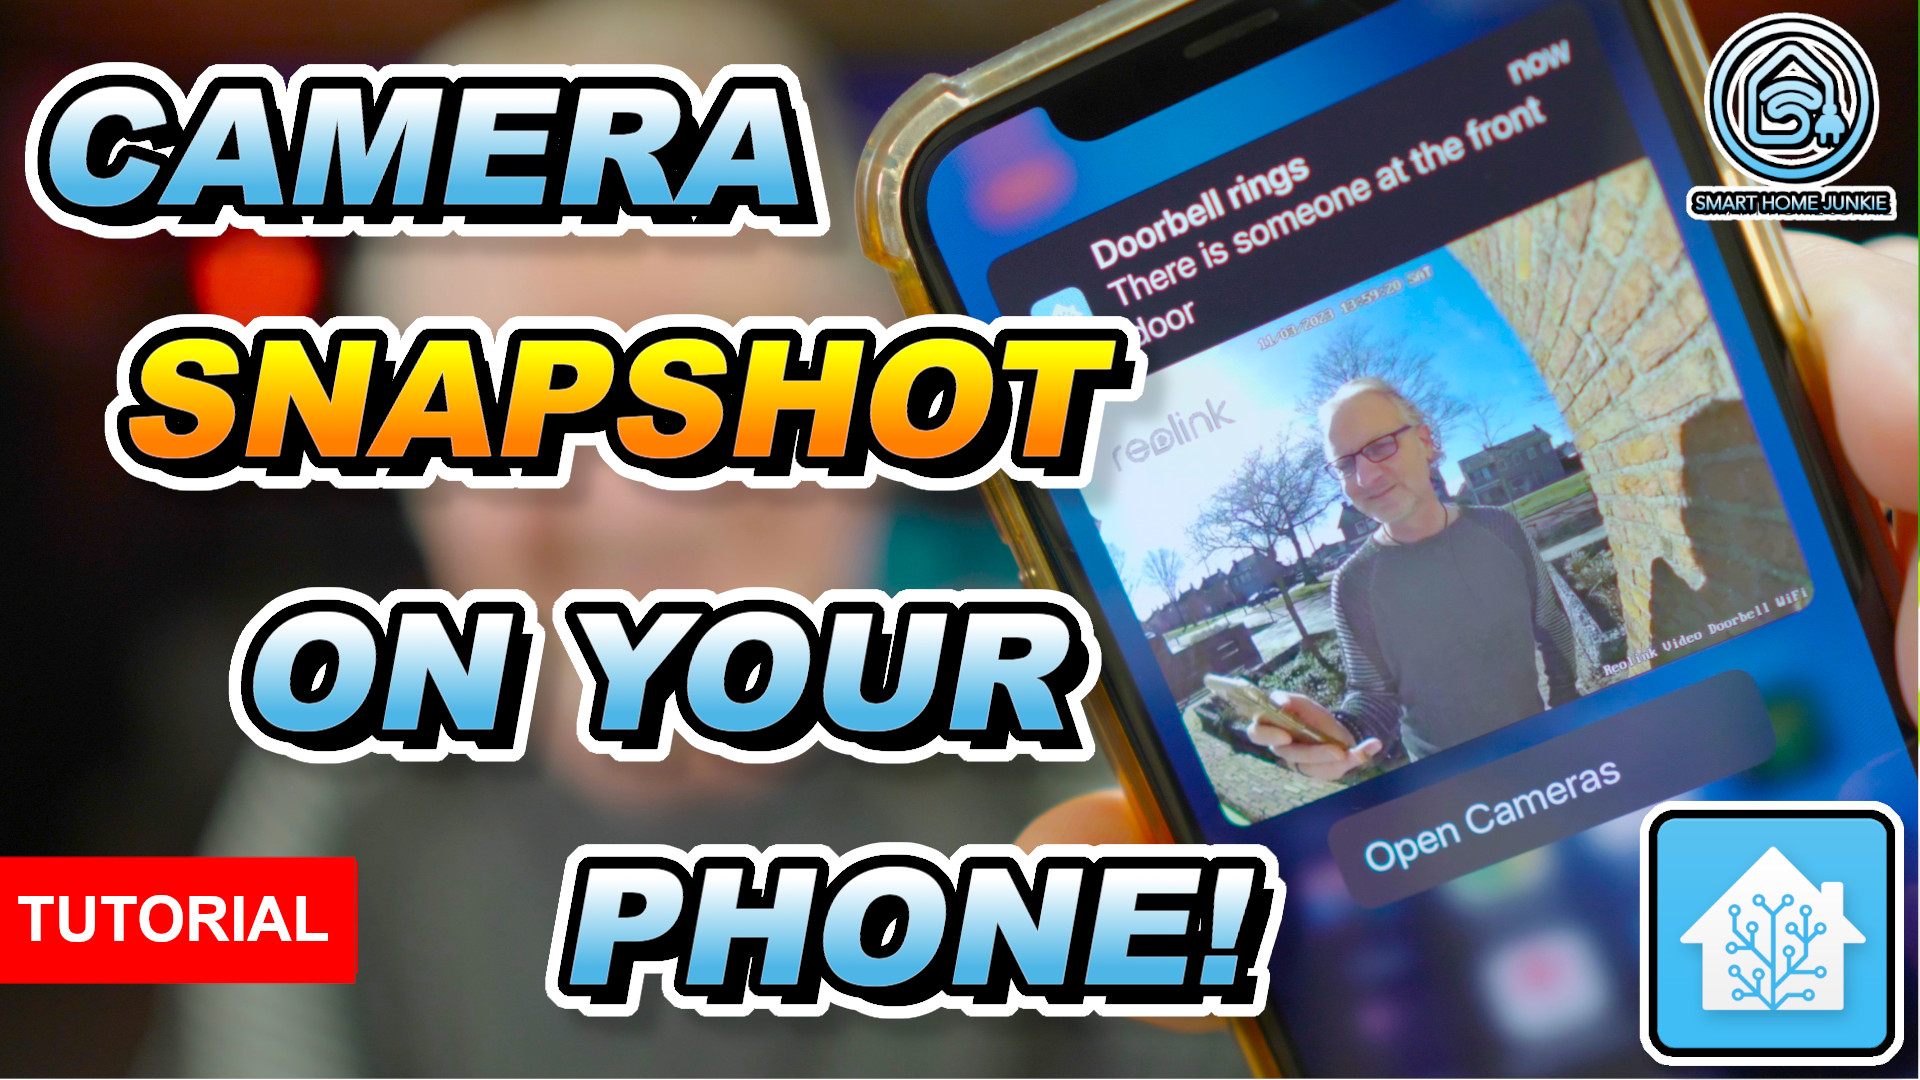 How to SHOW YOUR CAMERA REMOTELY on Your Phone When The Doorbell Rings!